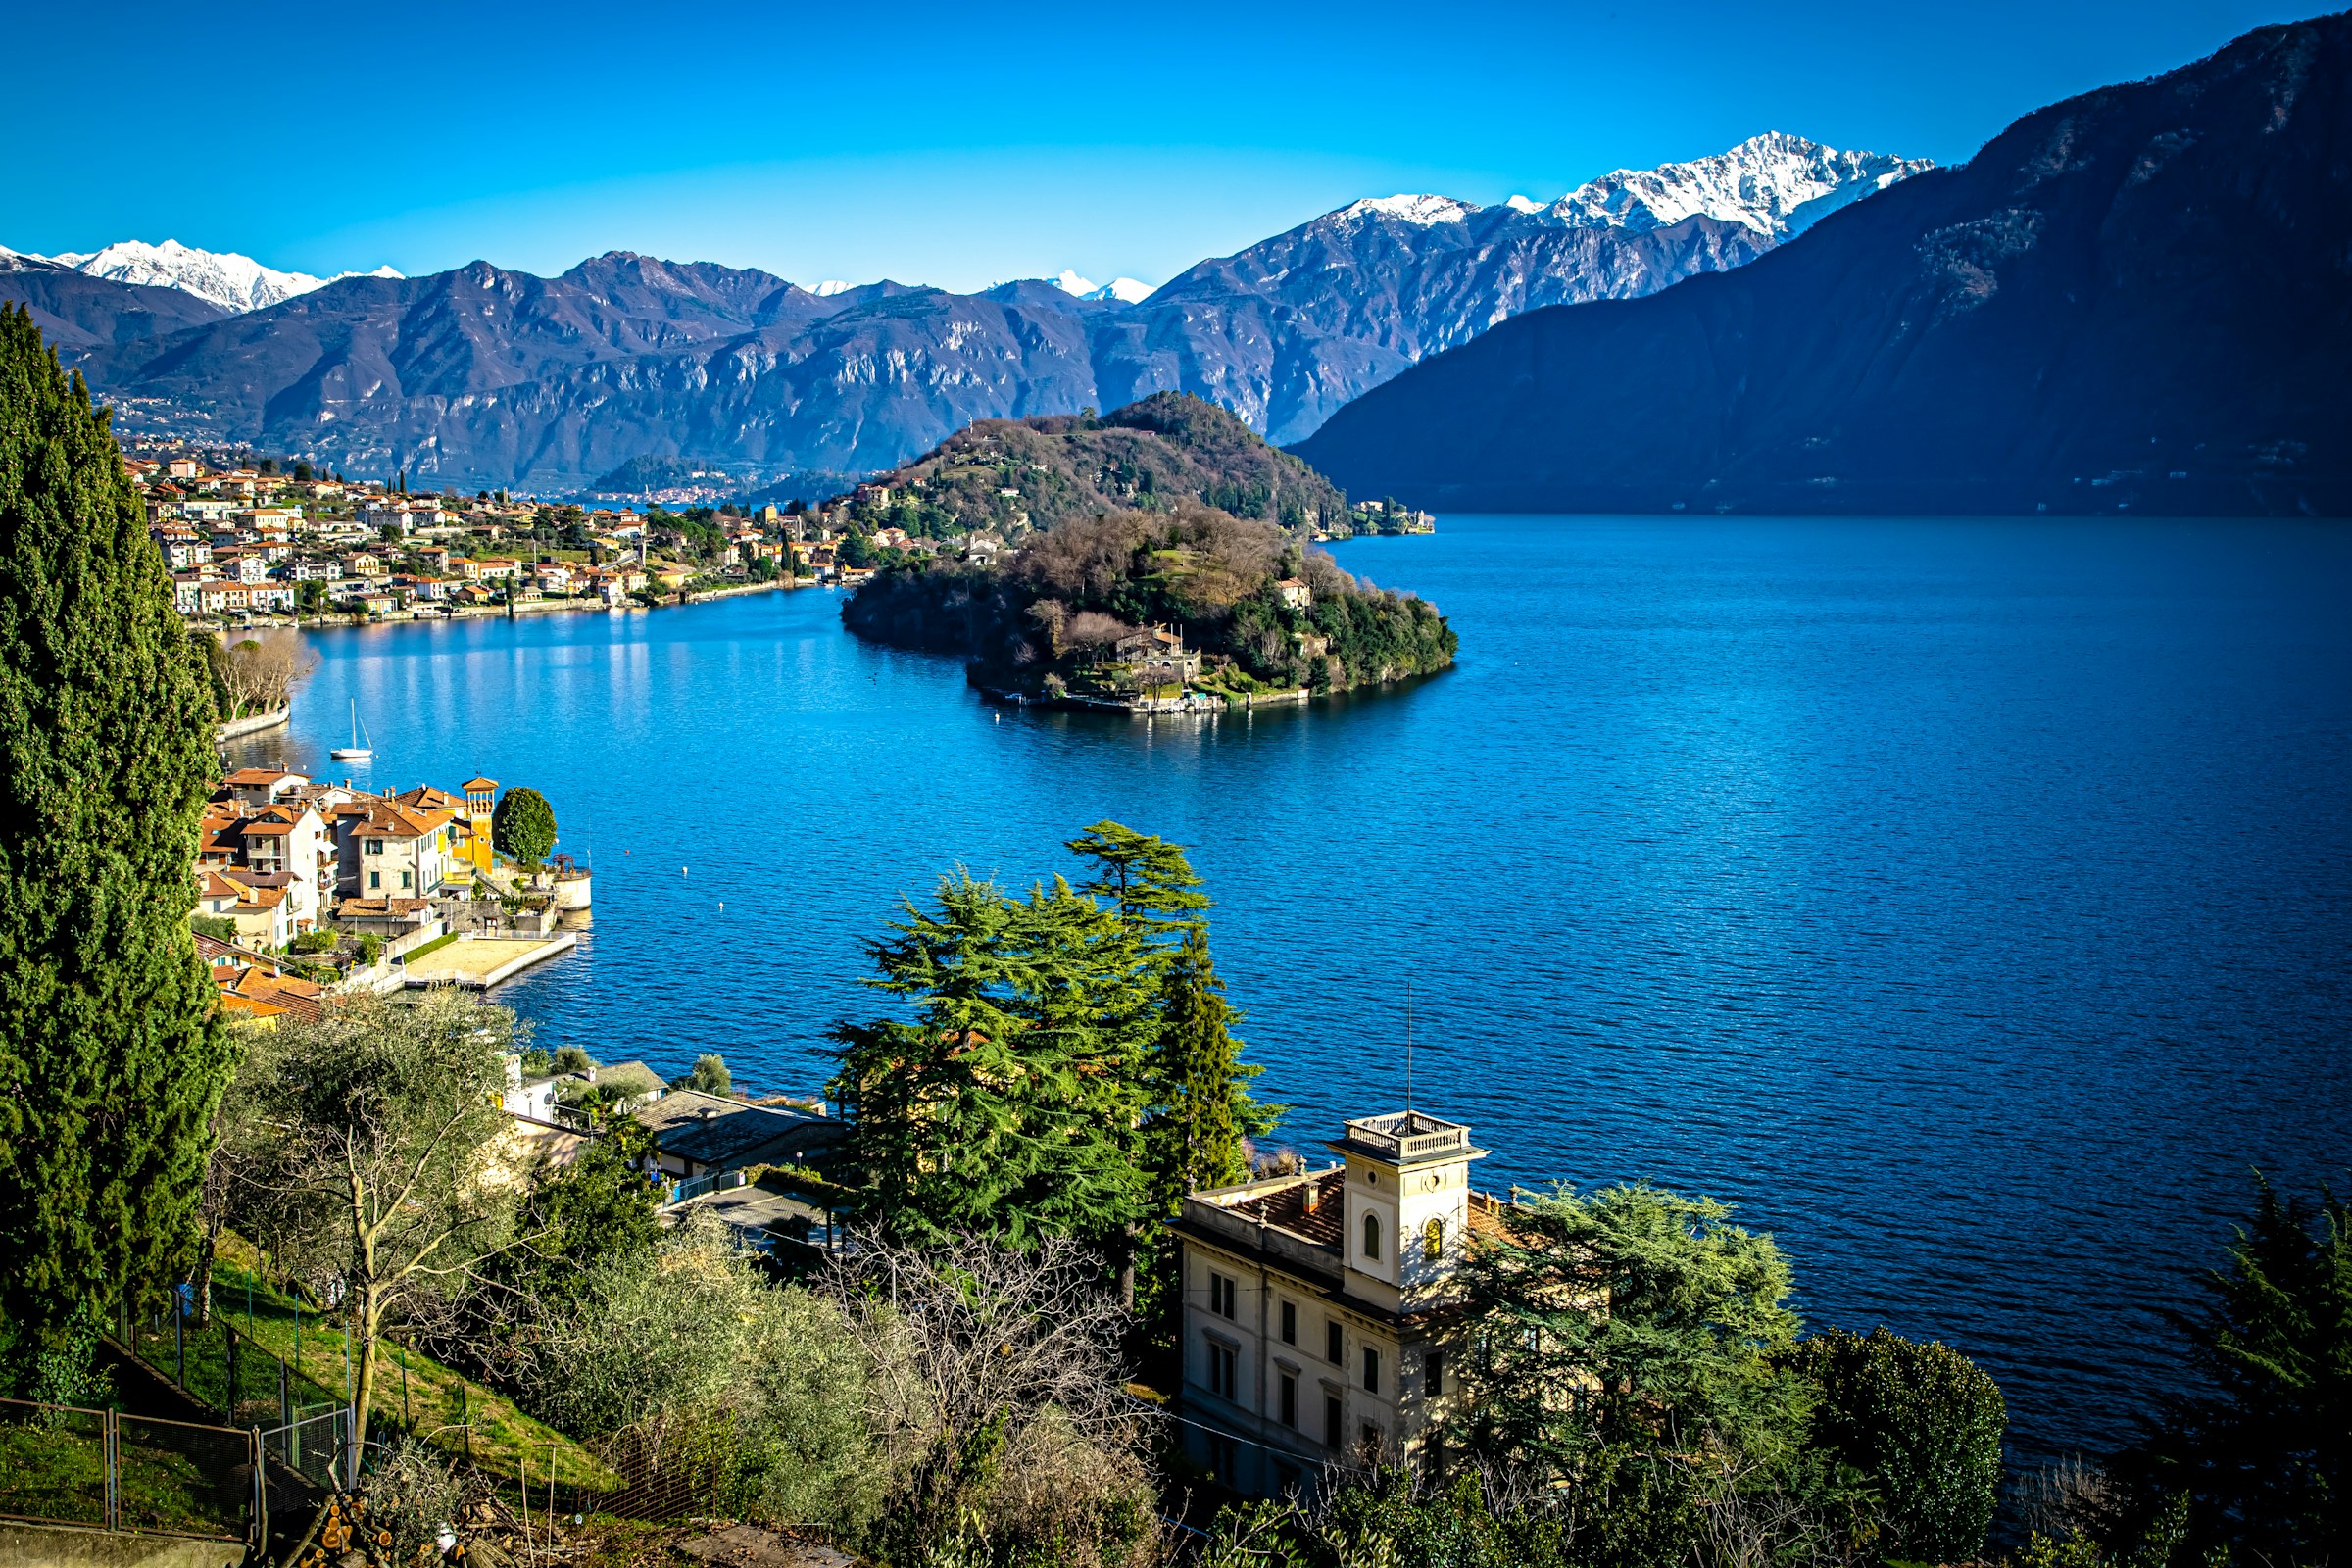 There’s no place like Como: luxury villas to rent in Lake Como